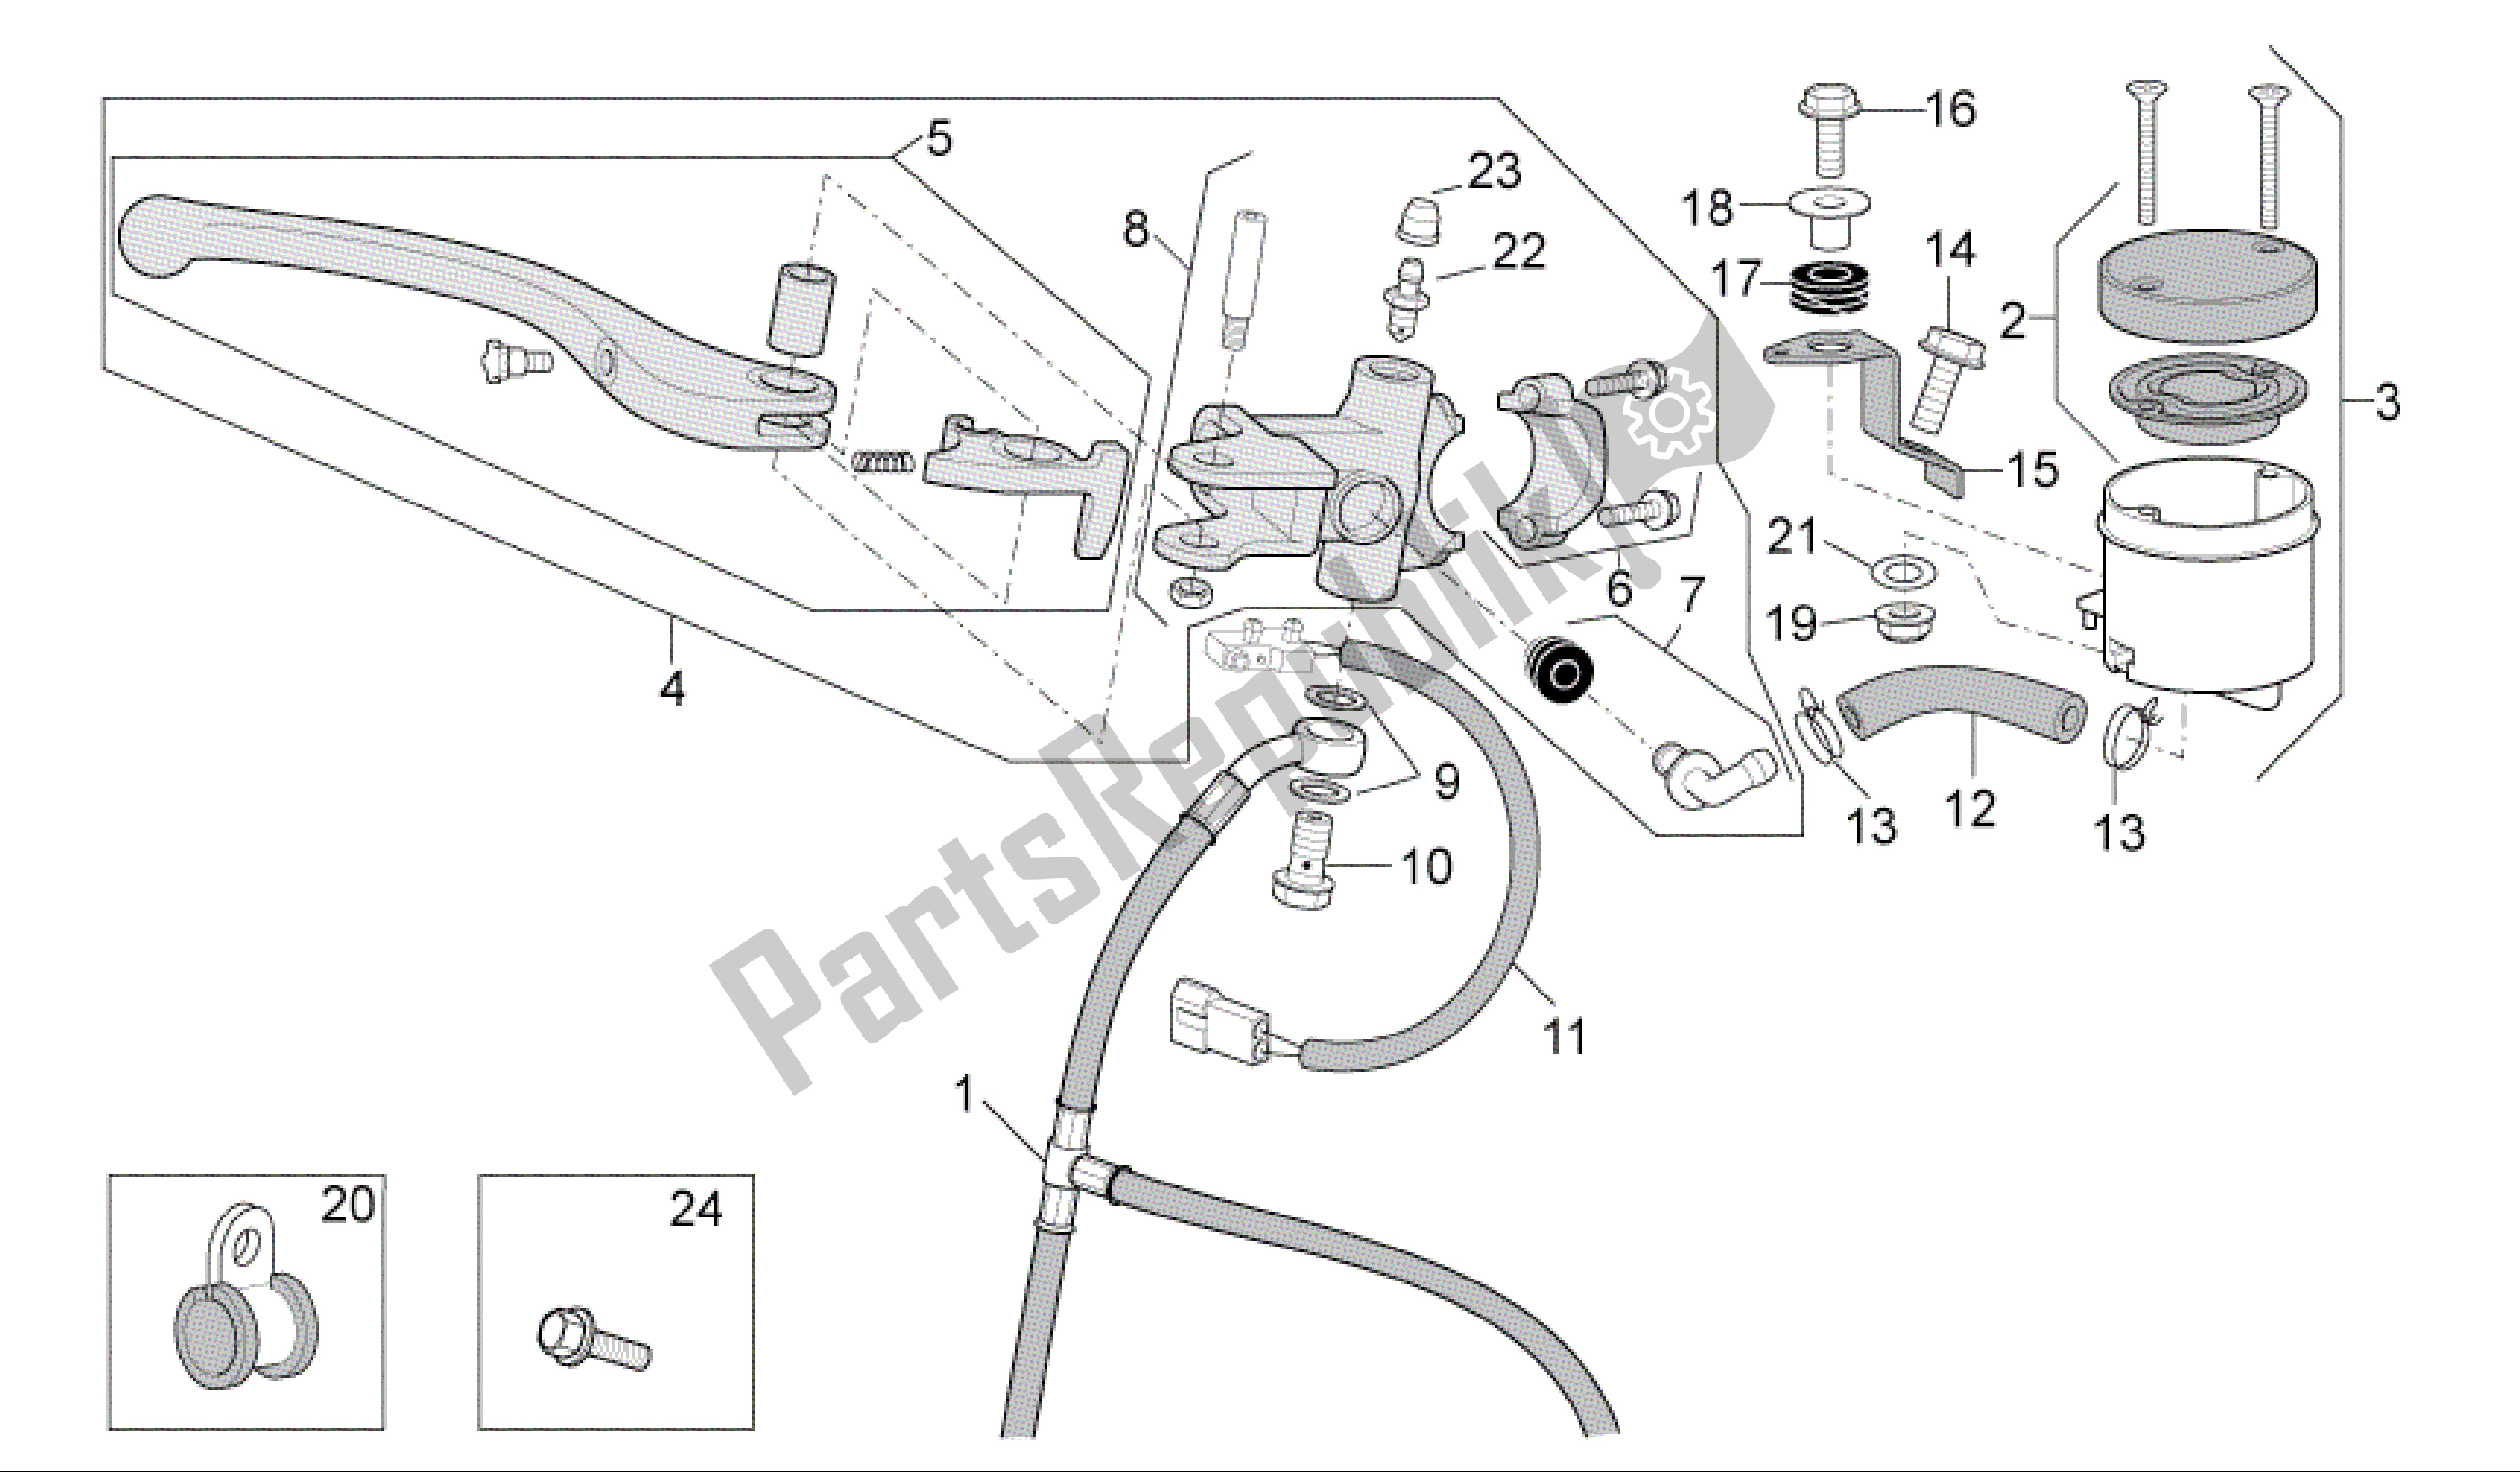 All parts for the Front Master Cilinder of the Aprilia RSV4 R 3980 1000 2009 - 2010